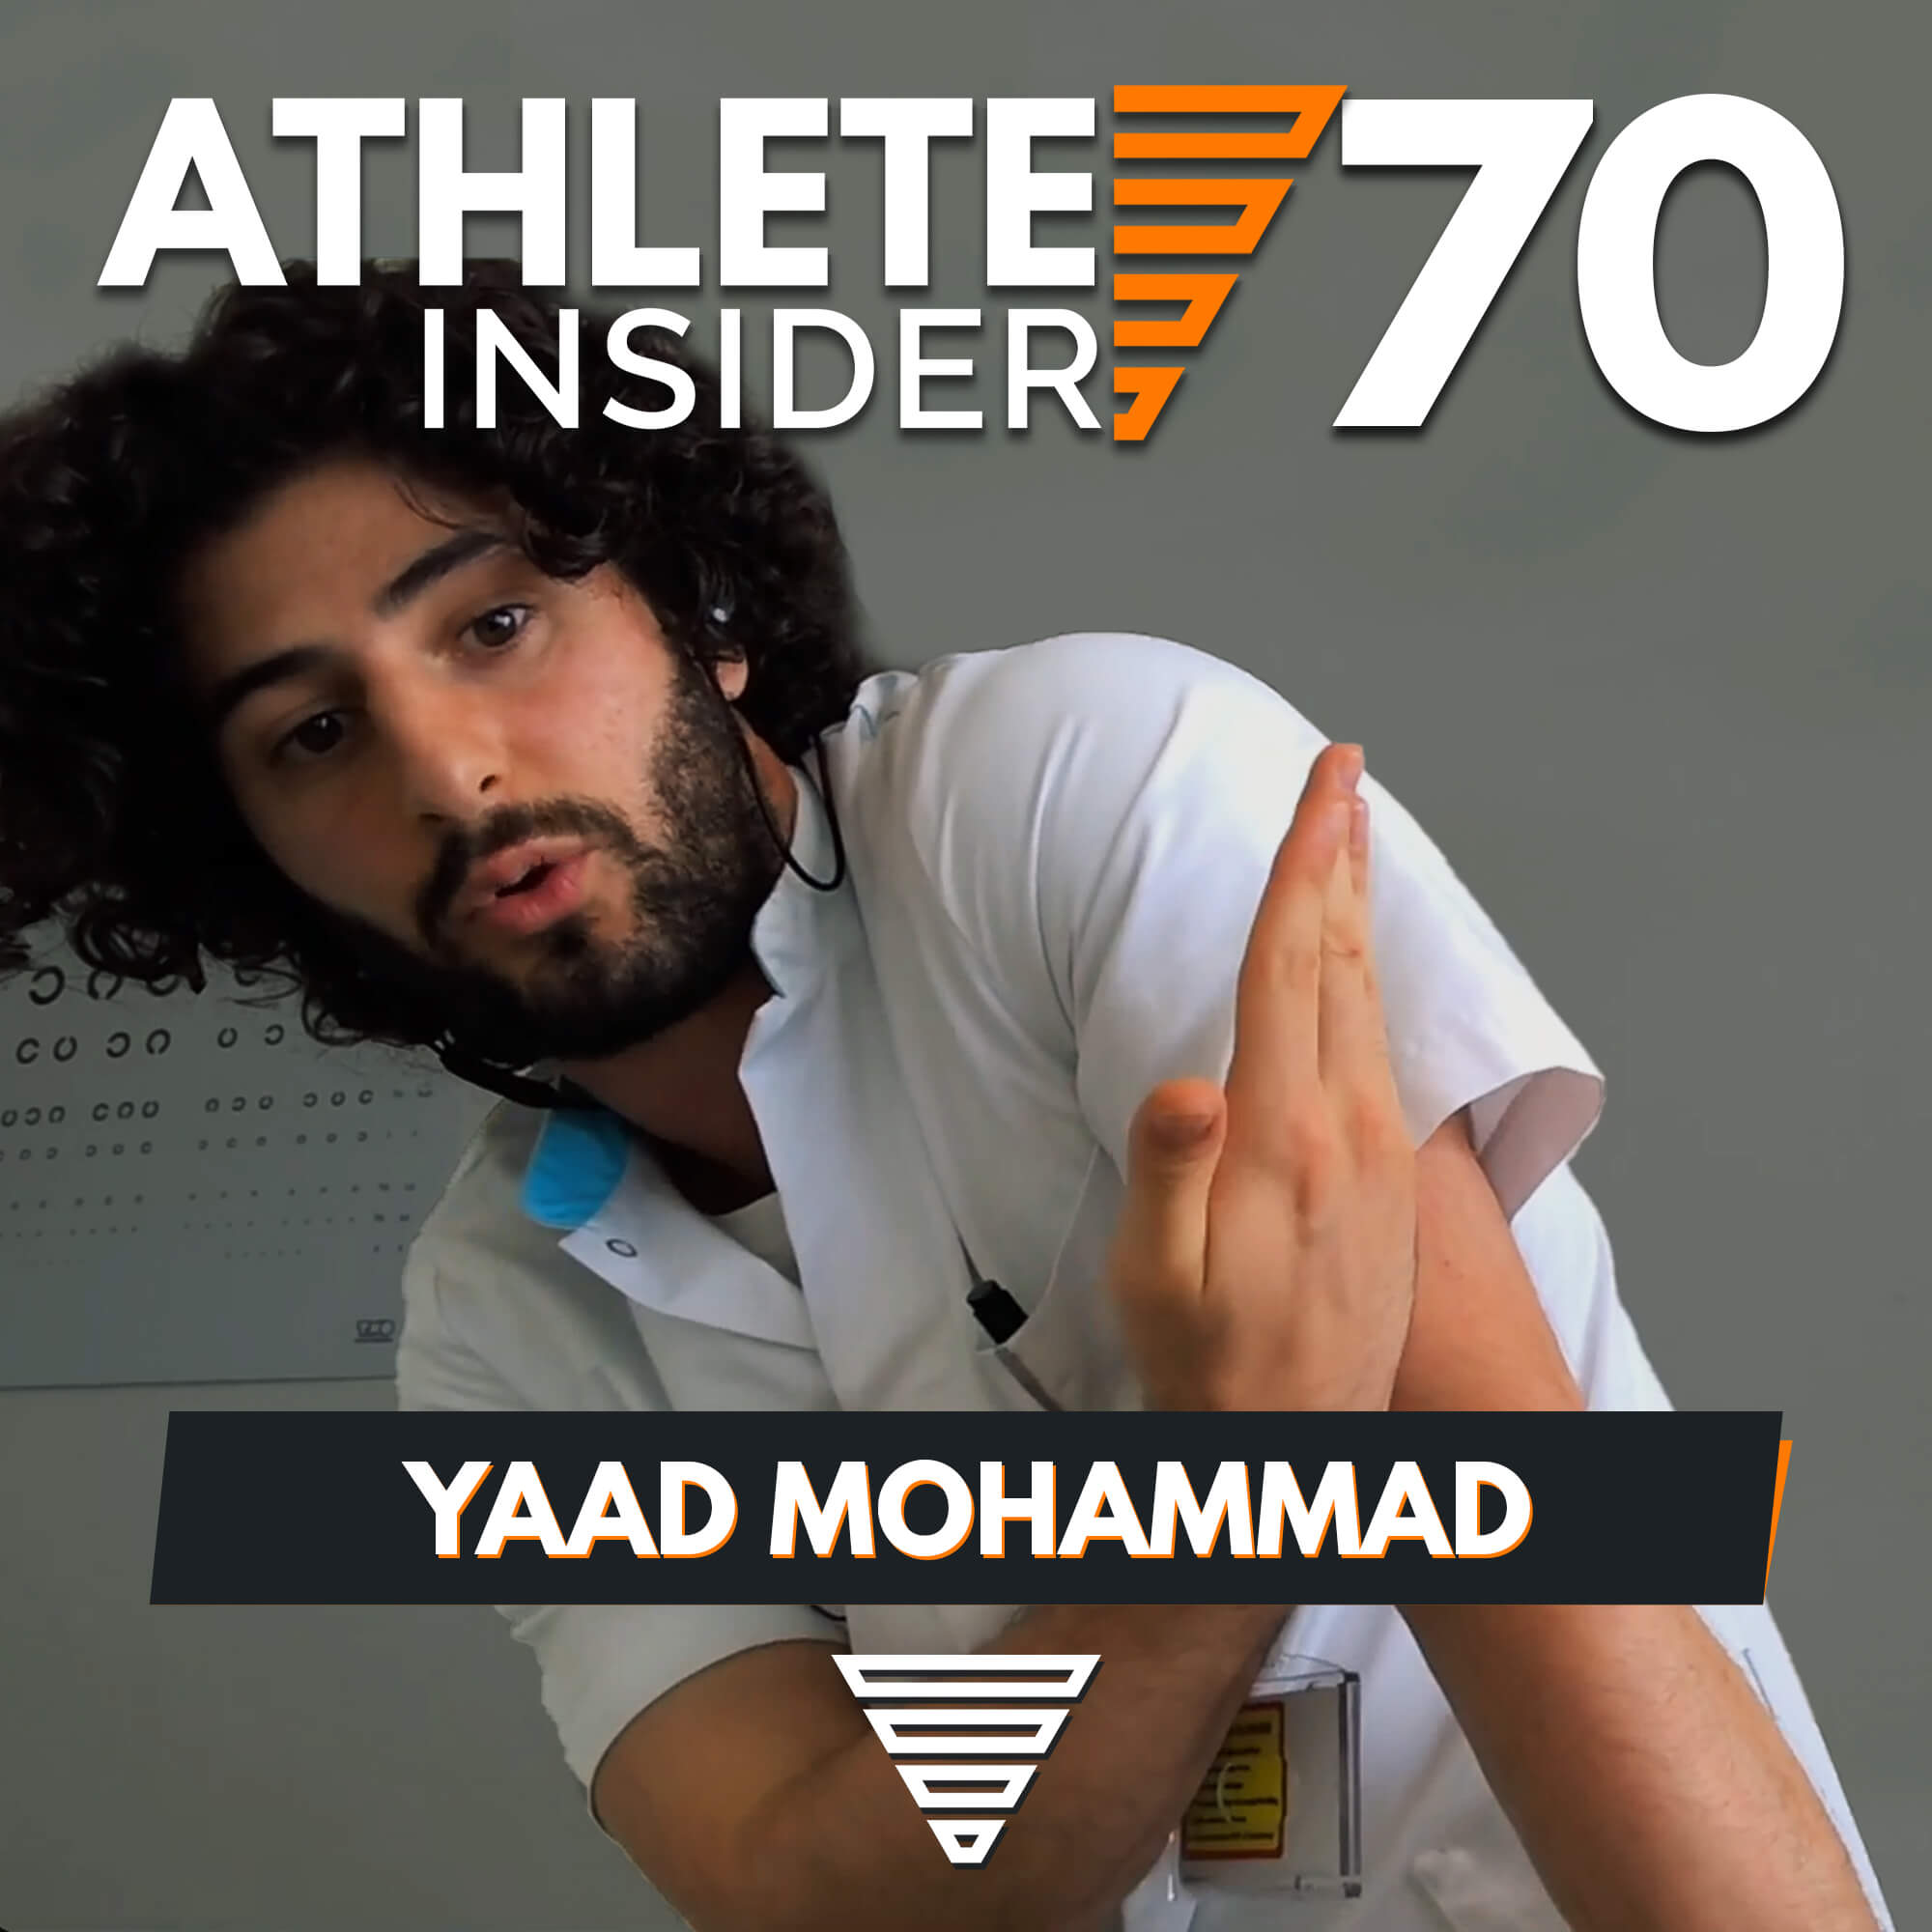 ADVICE YOU NEVER HEARD OF BEFORE | Interview with Yaad Mohammad | Athlete Insider Podcast #70